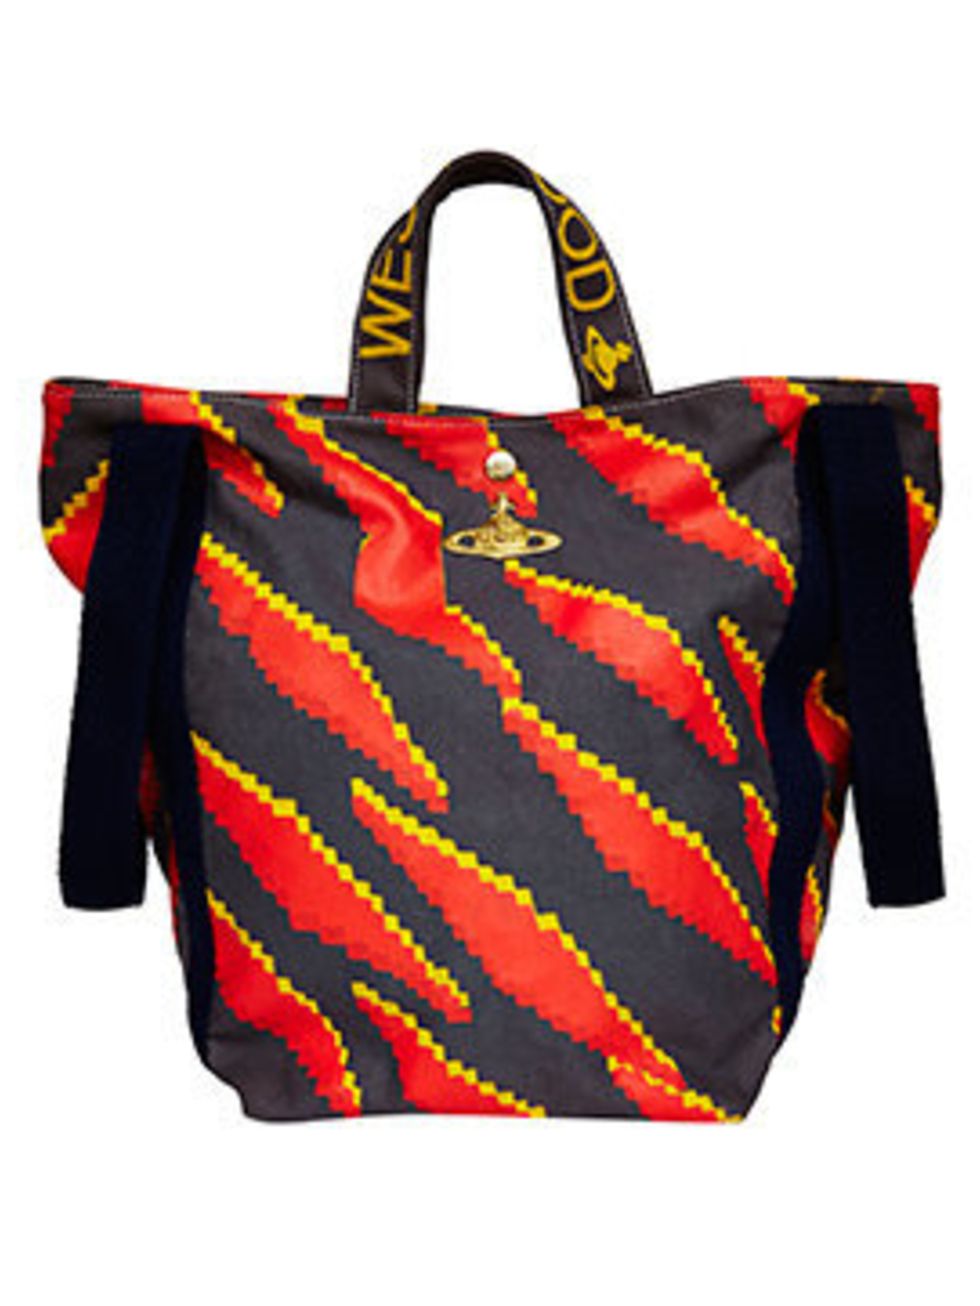 <p>Shopper Bag, £128 from the Vivienne Westwood Africa collection from ASOS</p>